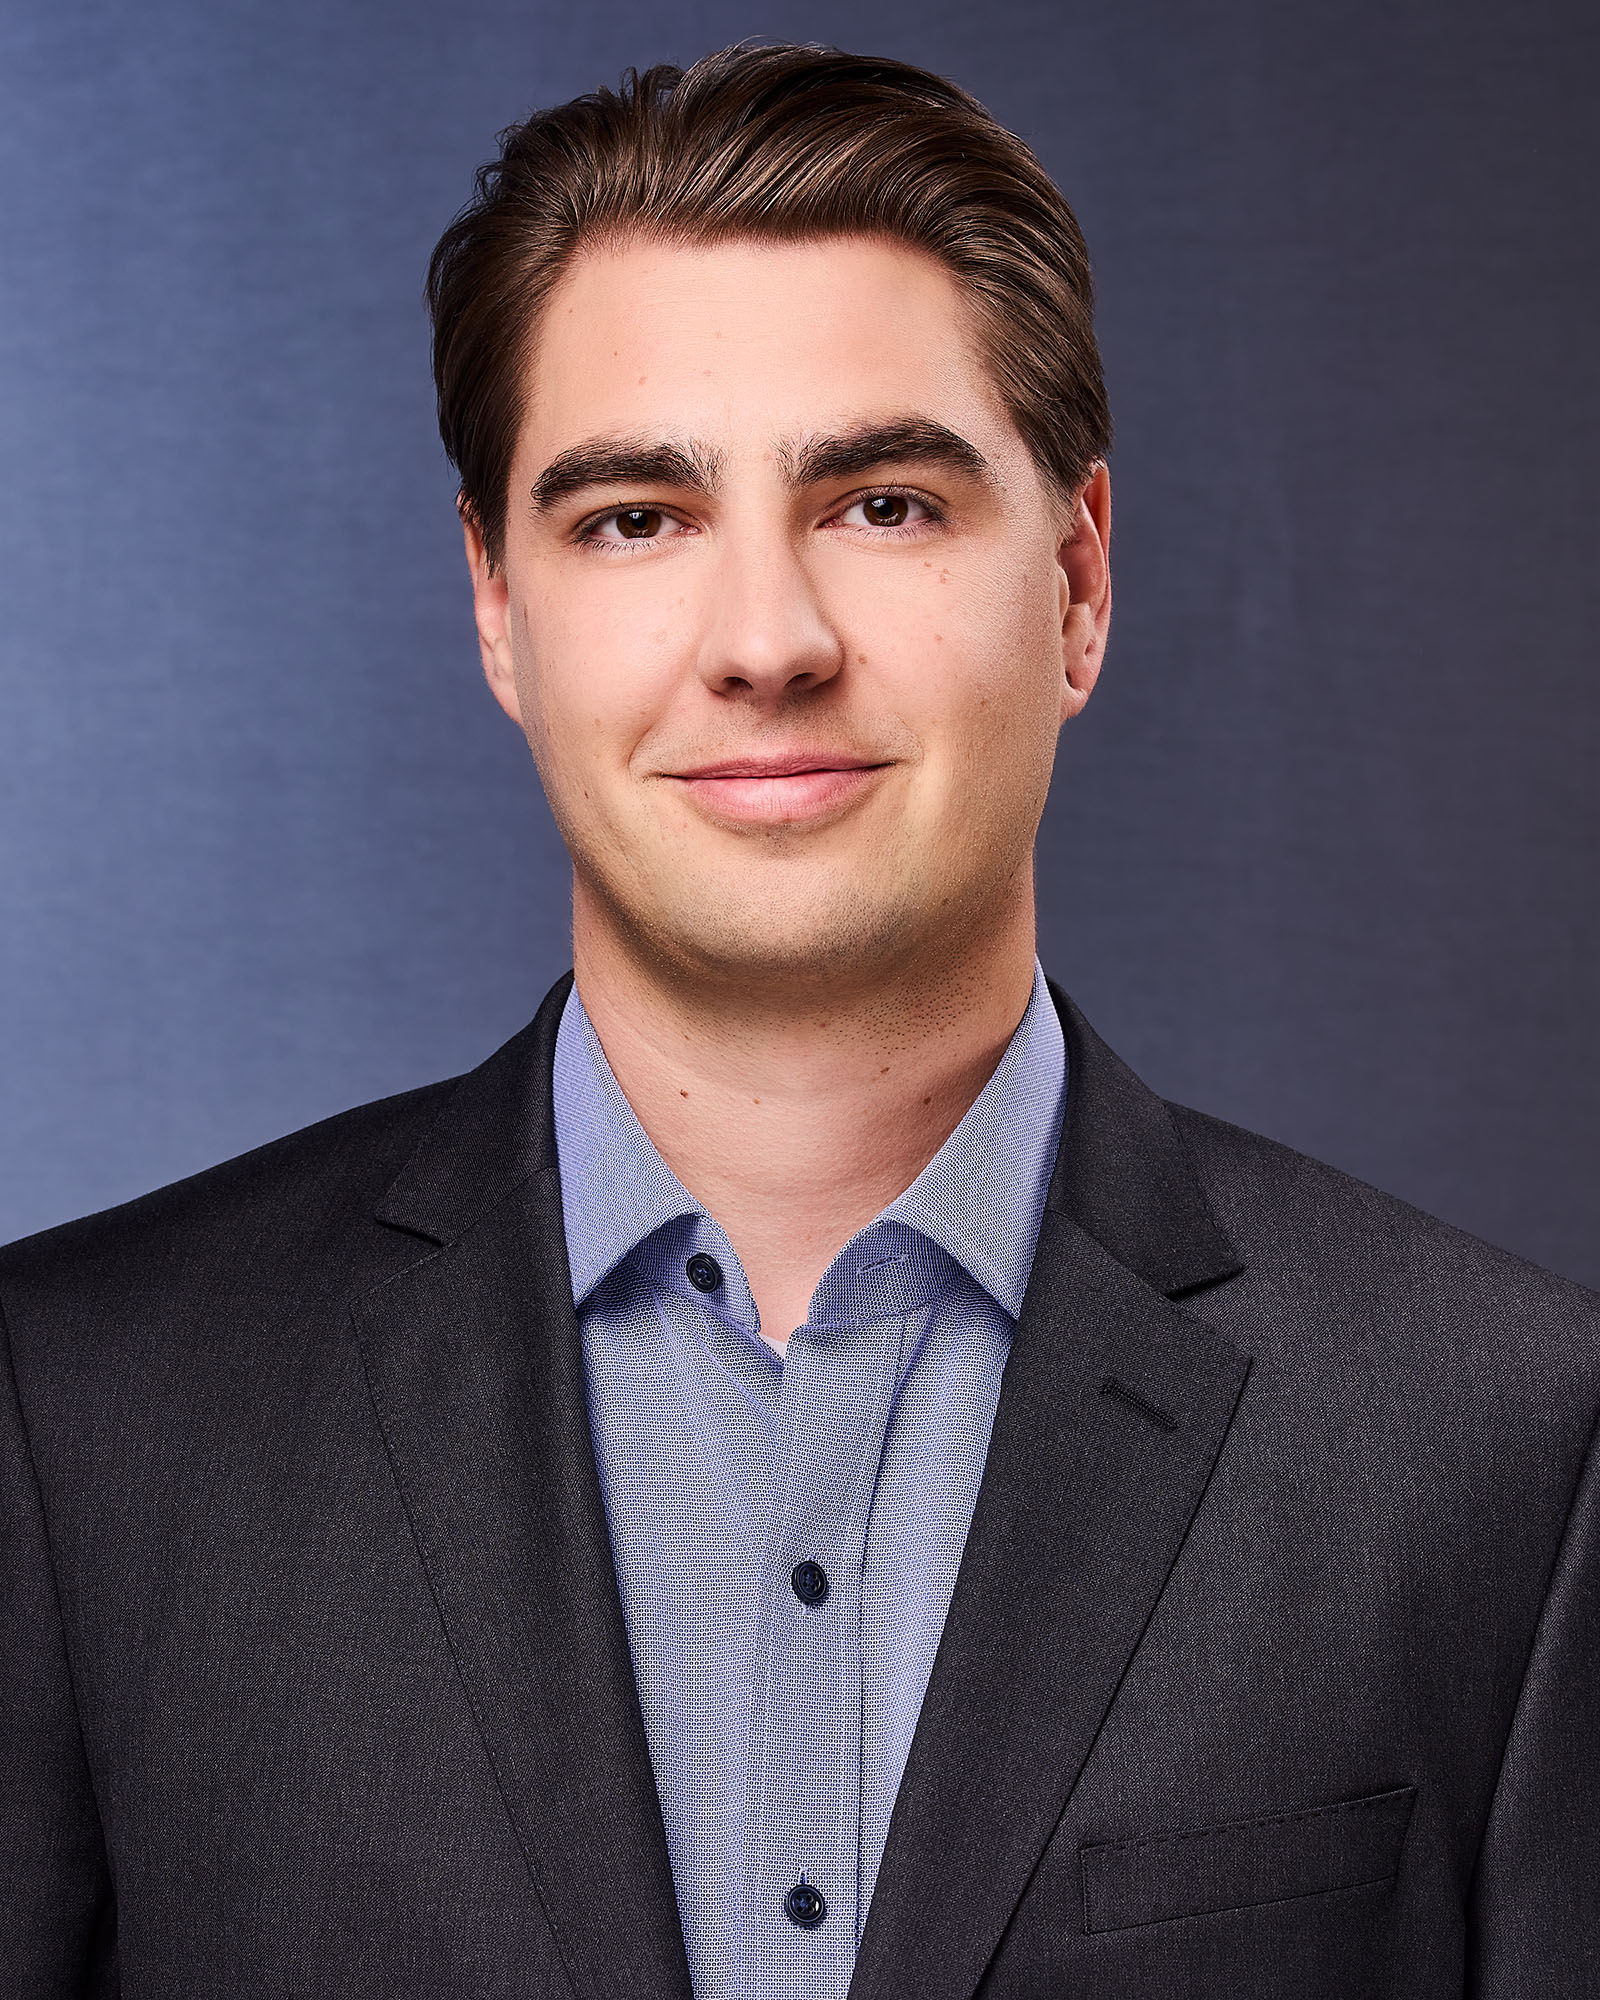 a corporate headshot of a man in a suit made by The Light Committee